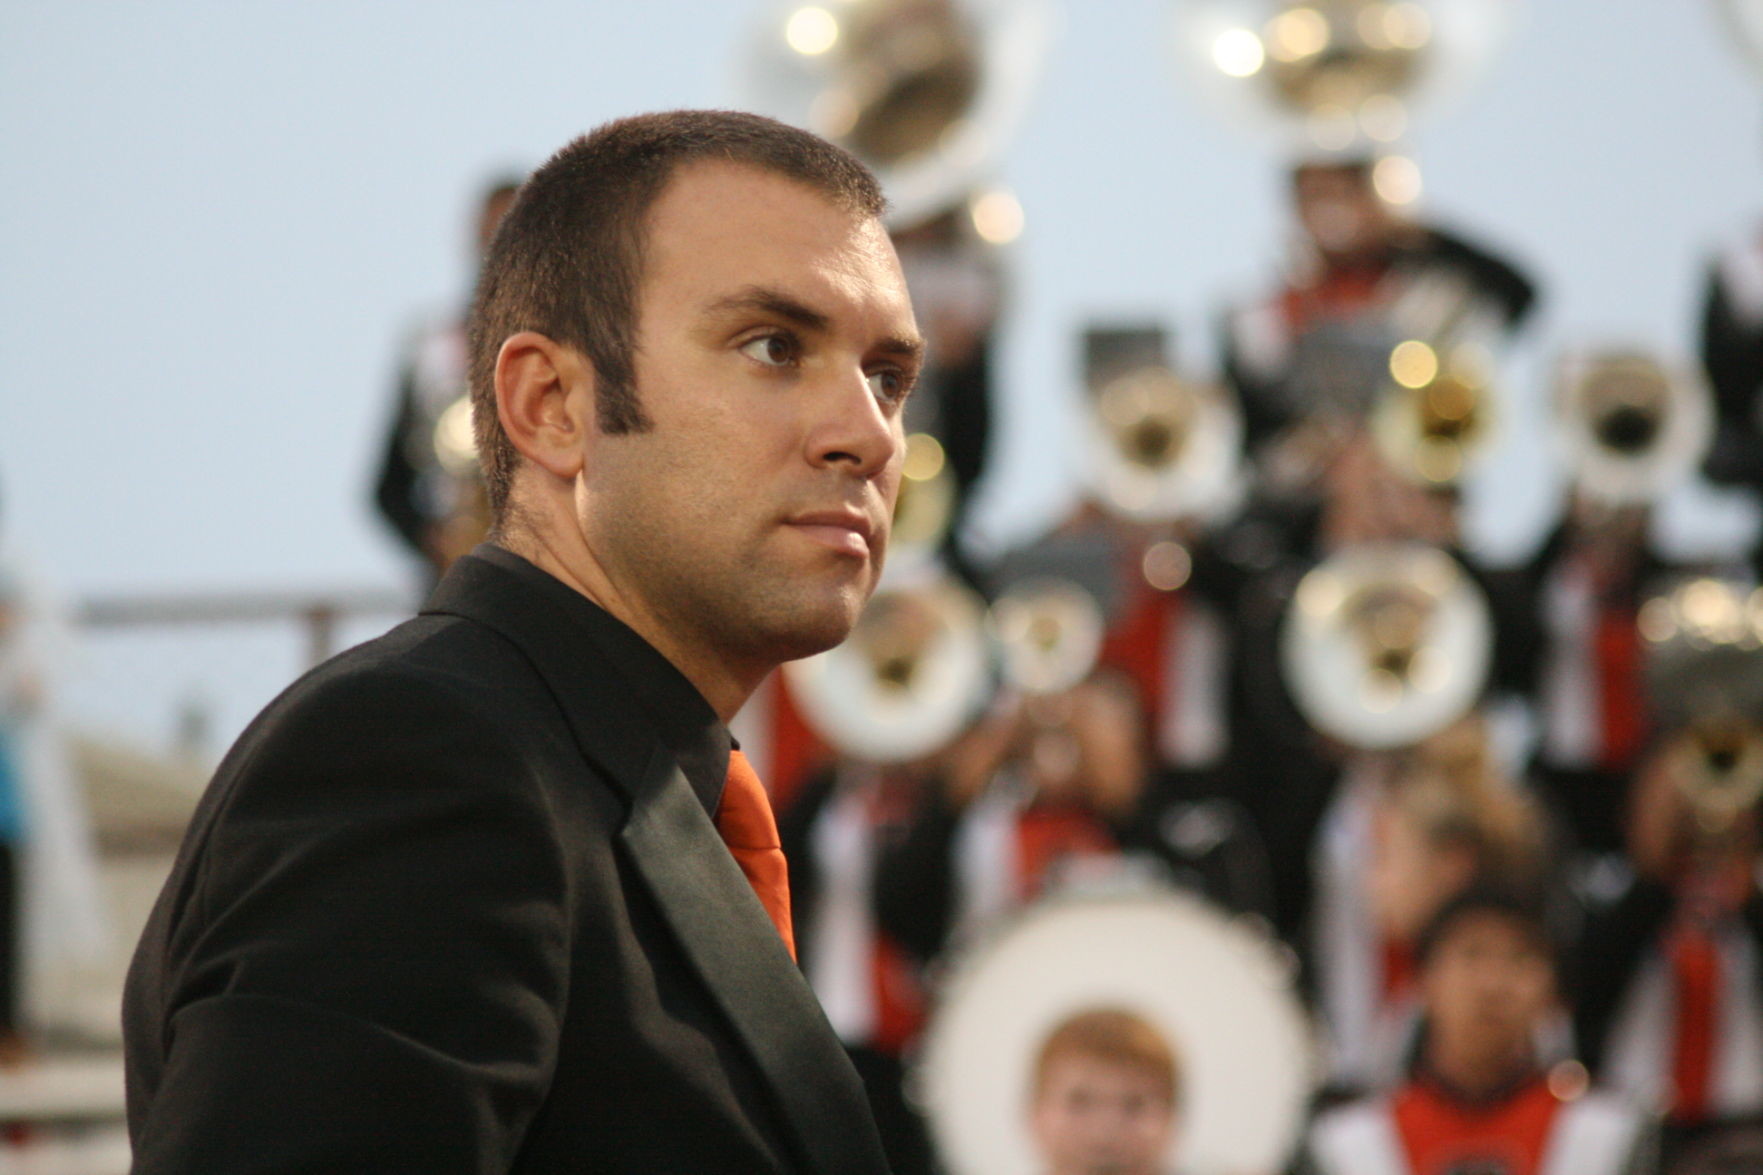 Gonzales High School band director Raymond Parker uses his past experiences as a band student to guide the future of the Apache Band. By taking their success in stride, Parker says they will reach their ultimate goal.